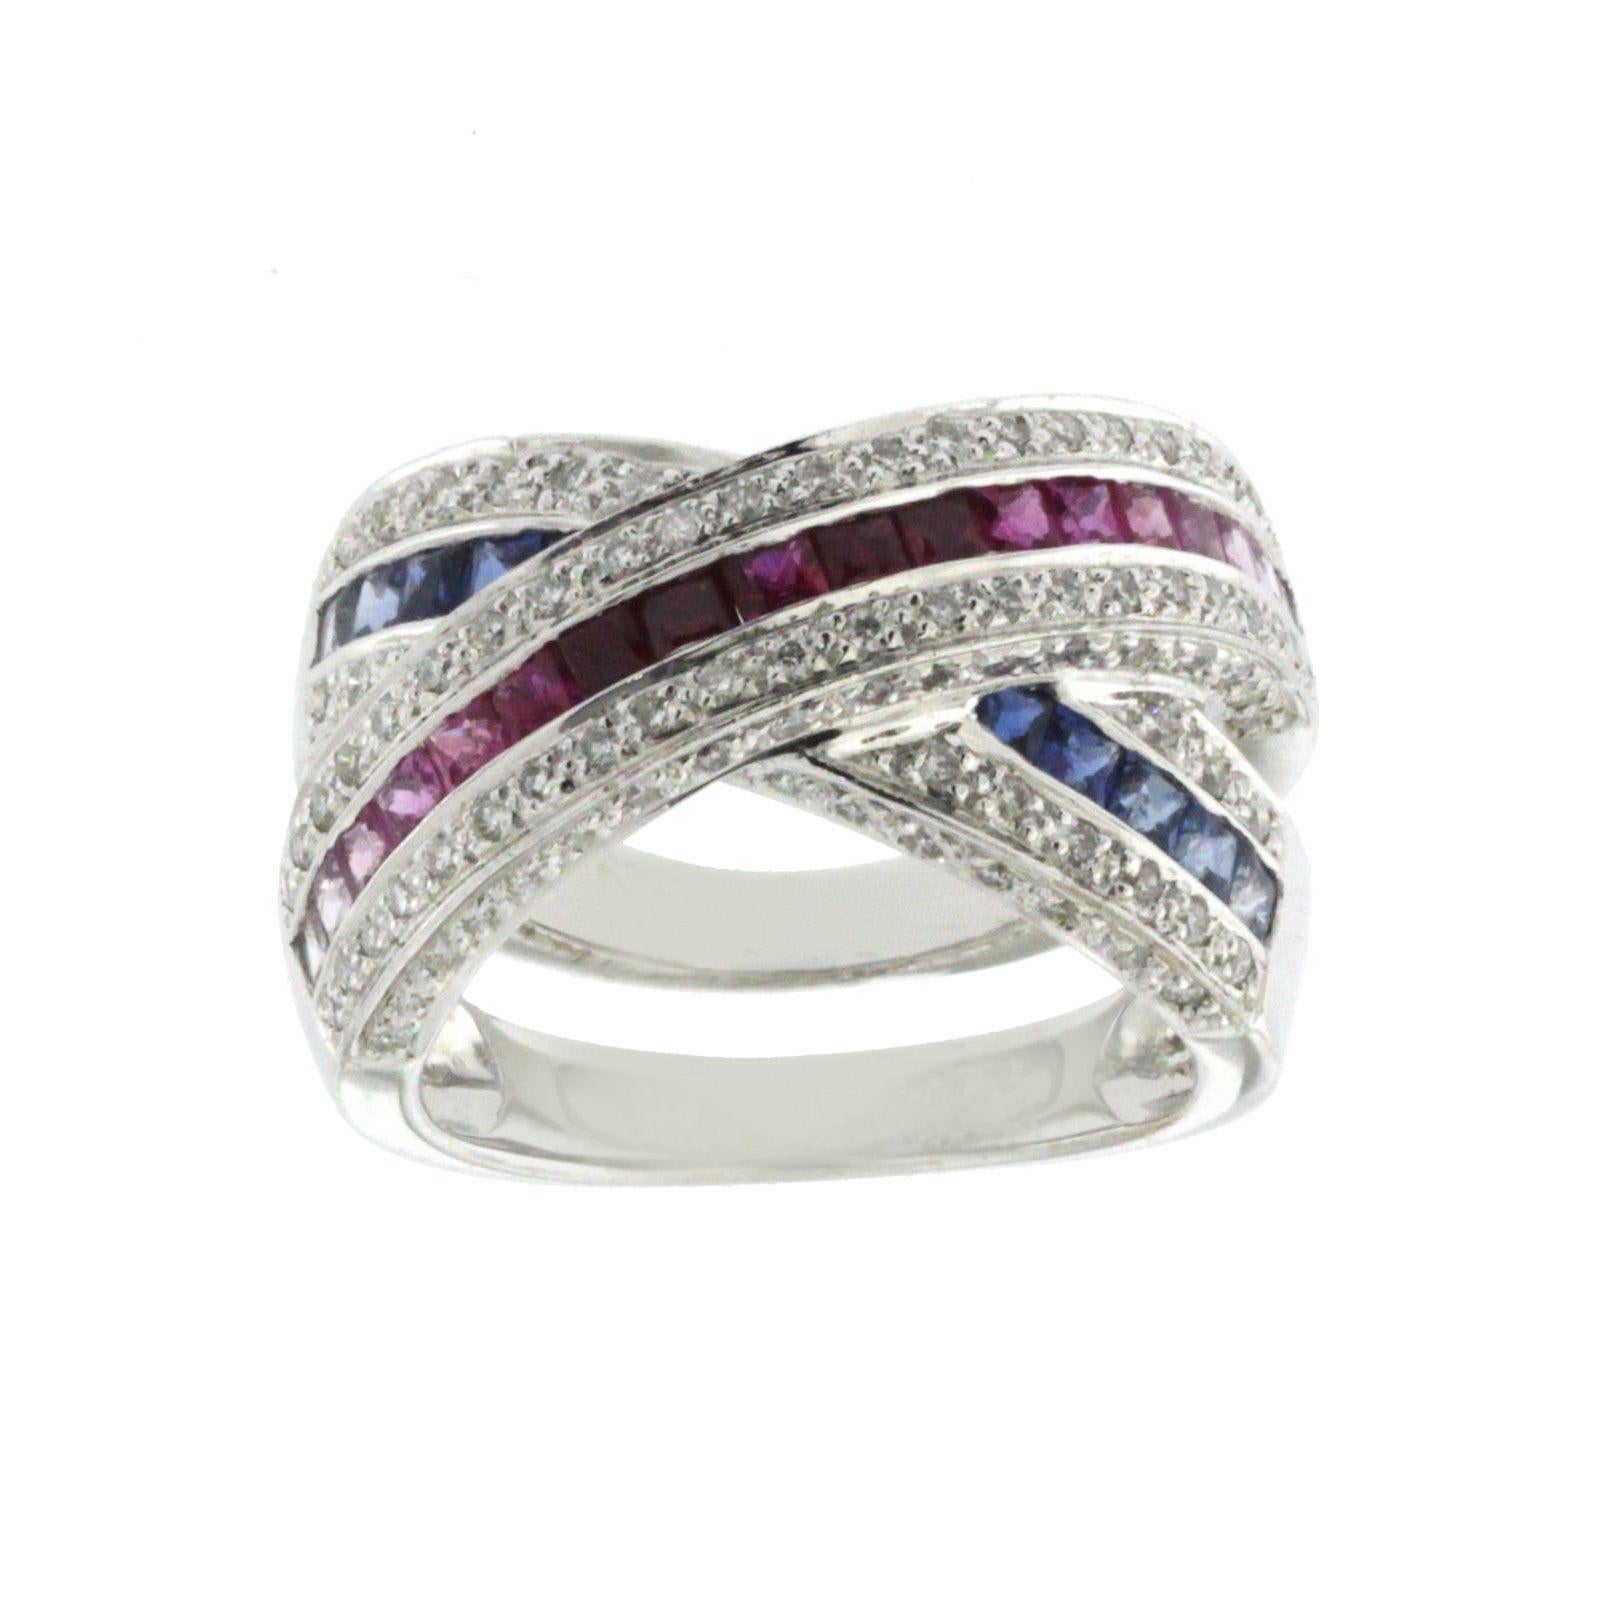 Top: 13 mm
Band Width: 8.5 mm
Metal: 18K White Gold 
Size: 6-8 ( Please message Us for your Size )
Hallmarks: 750
Total Weight: 14.2 Grams
Stone Type: 1.55 CT Natural Multi Sapphires & 0.55 G SI1 CT Diamonds
Condition: New
Estimated Retail Price: